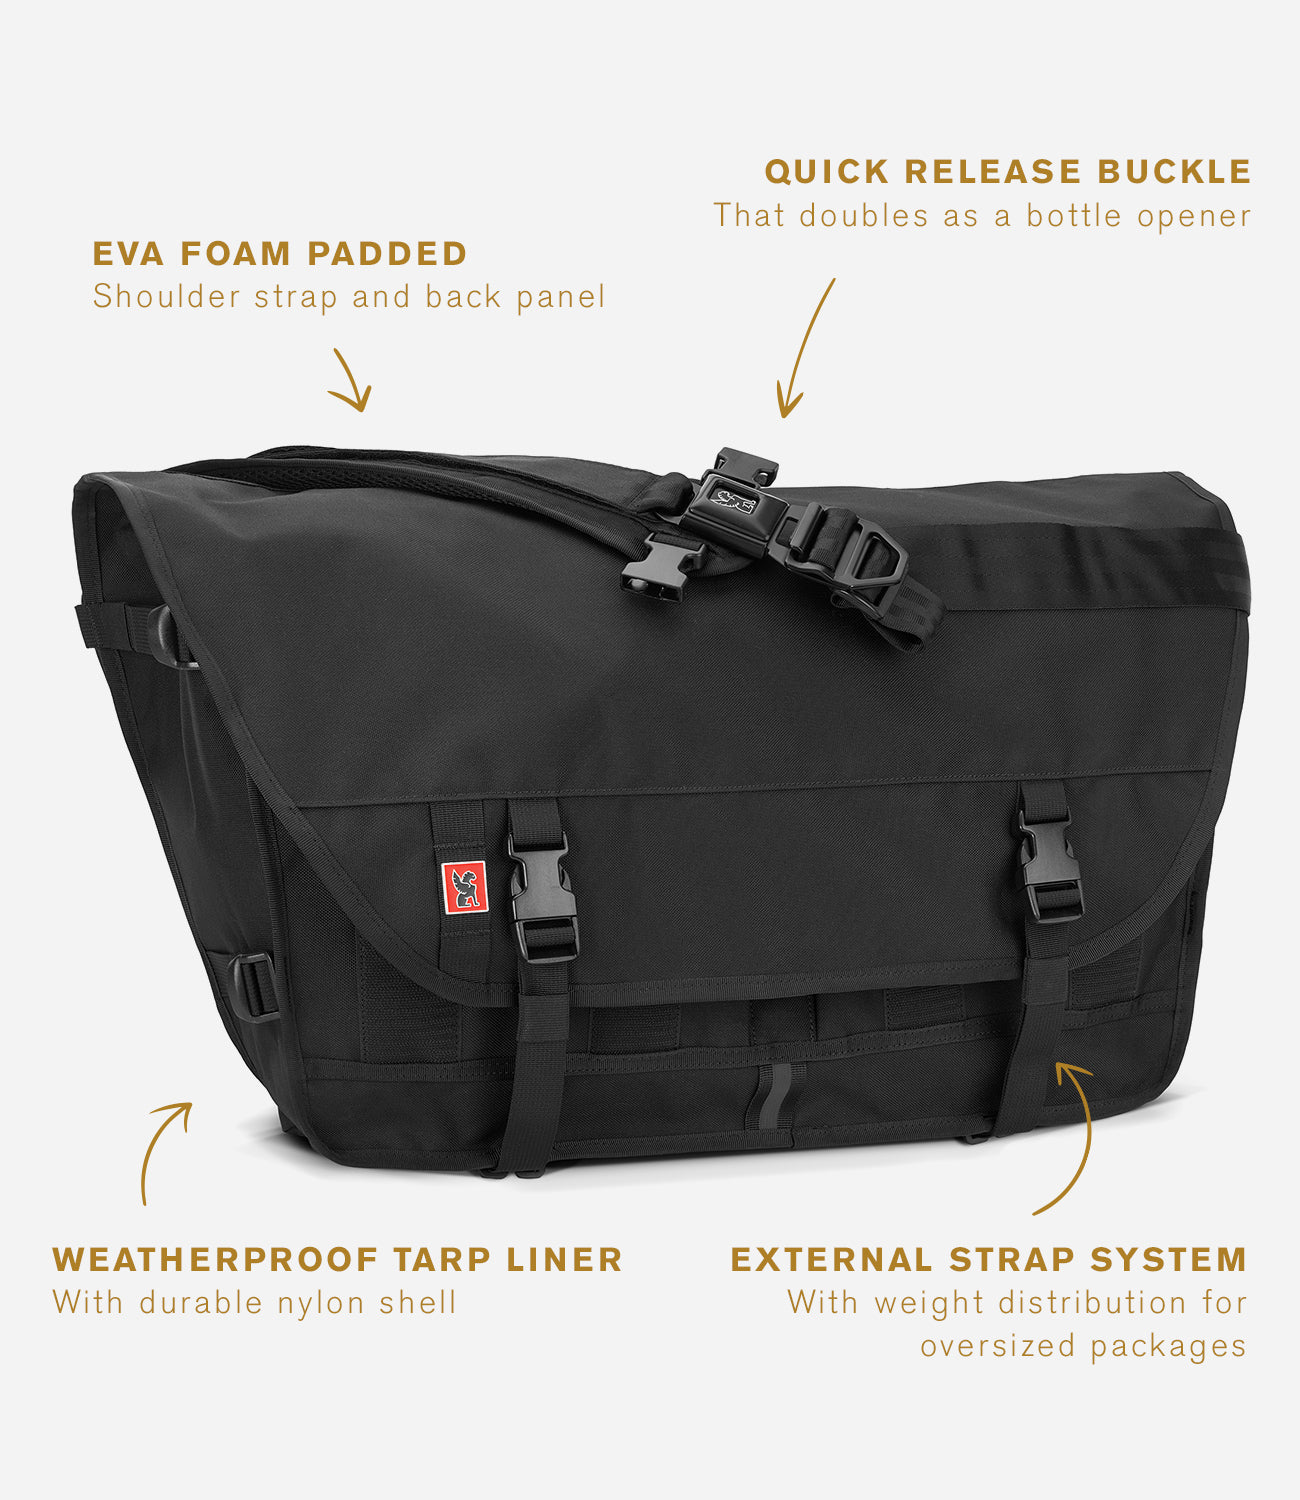 Berlin Messenger bag about the bag info mobile size